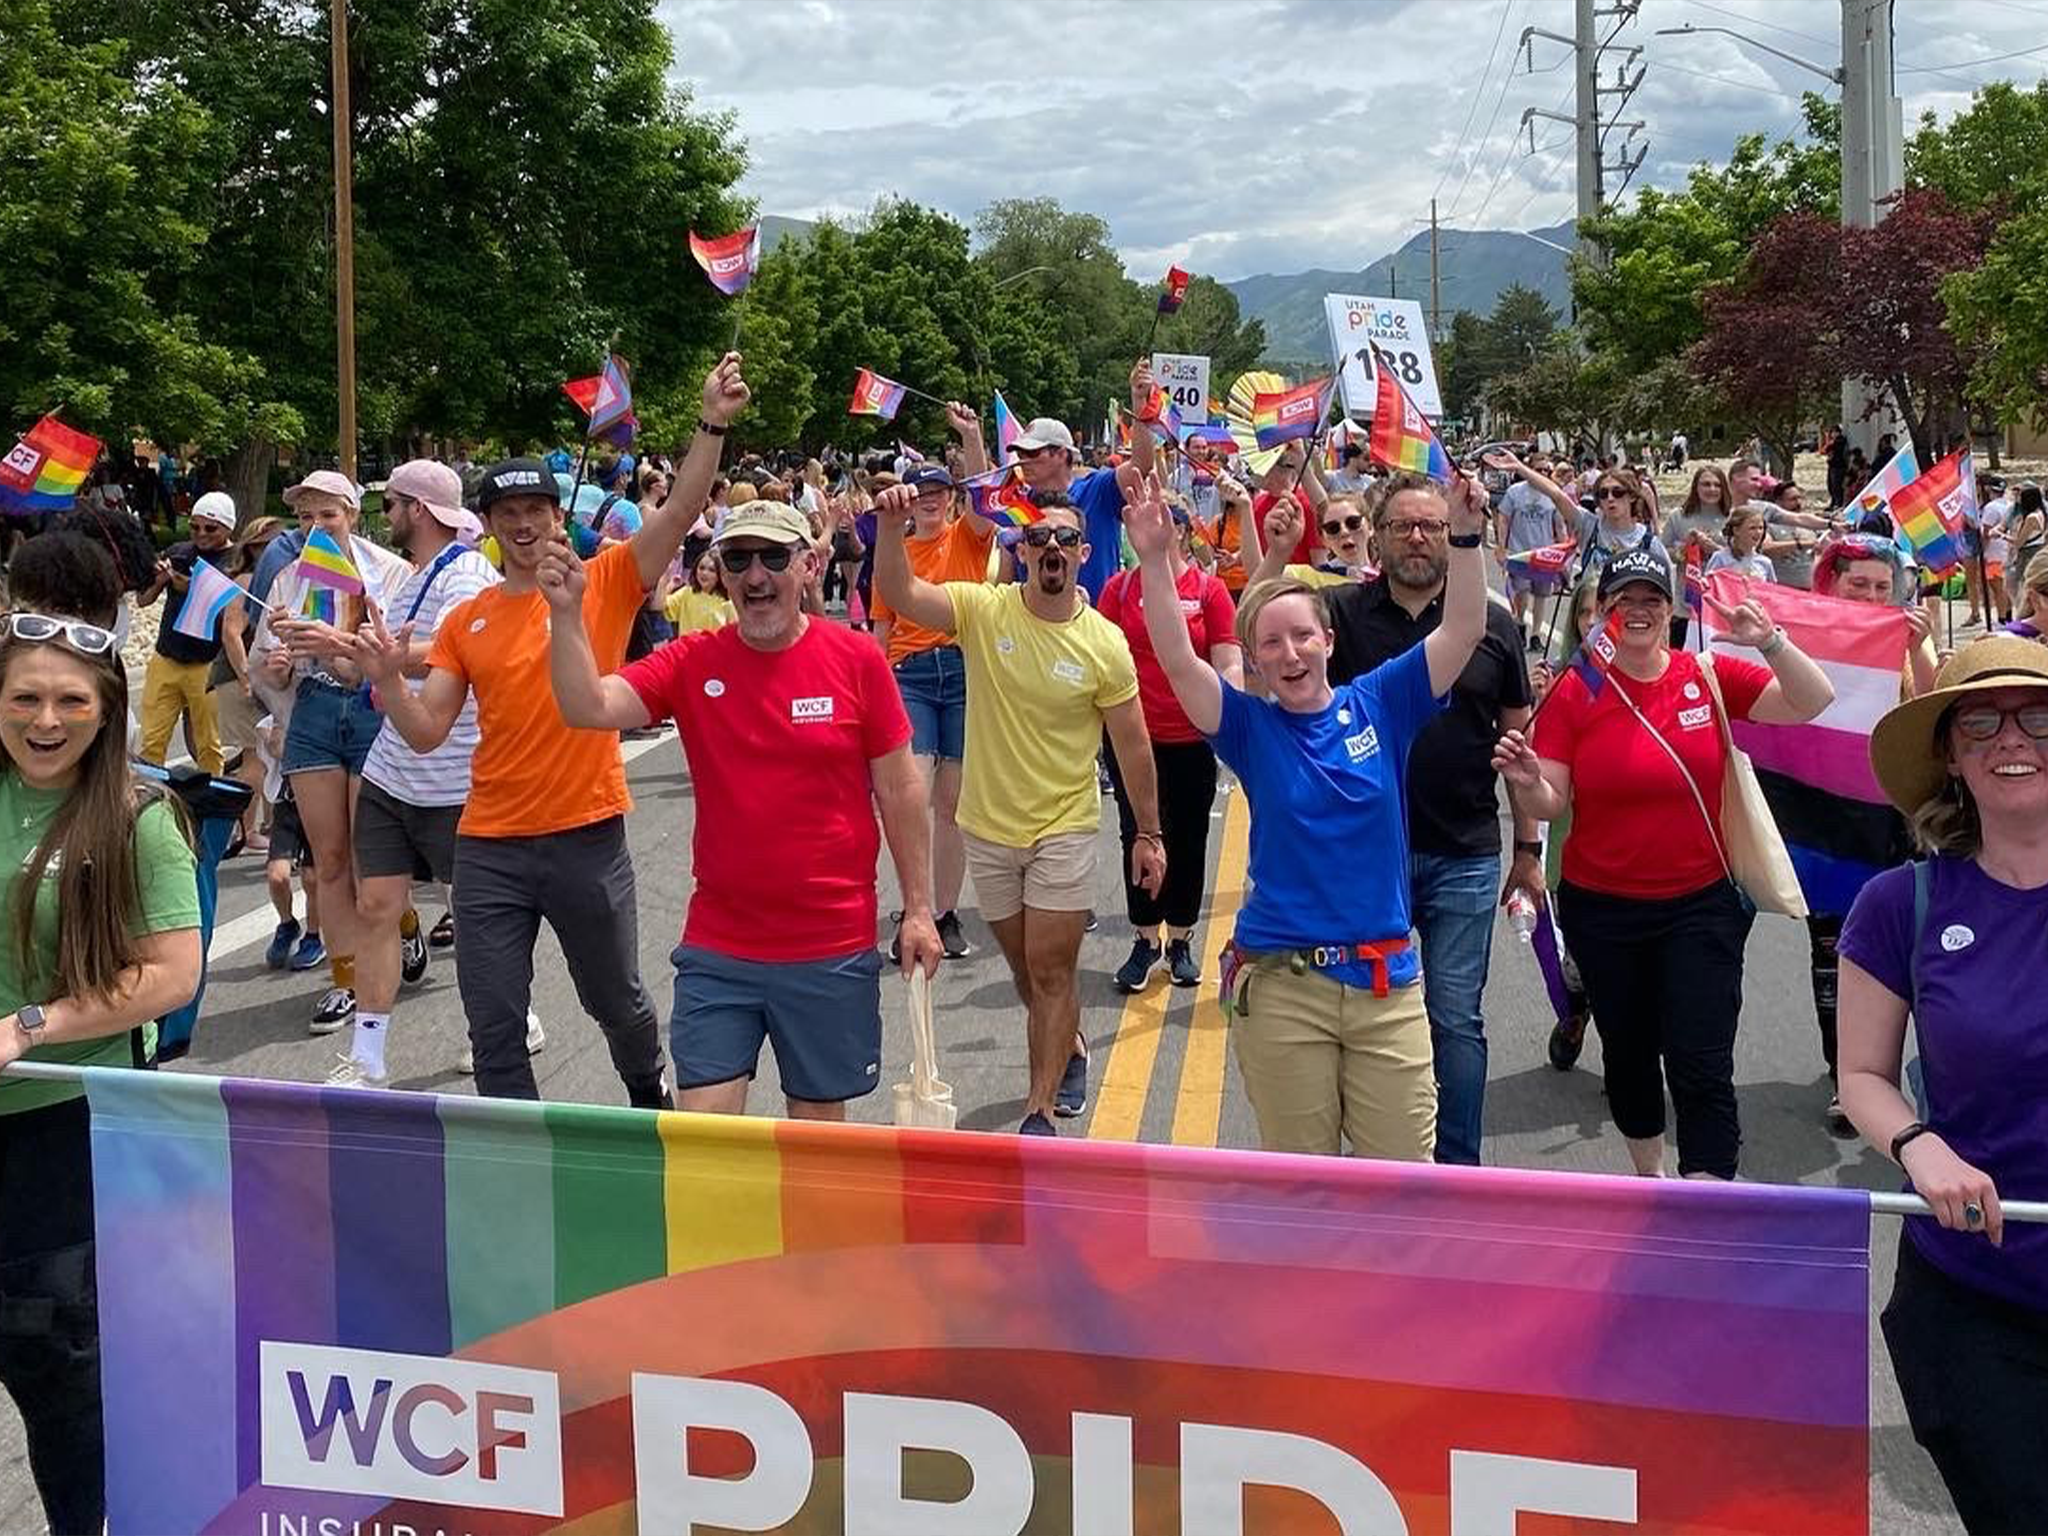 WCF employees and family walking in Pride.